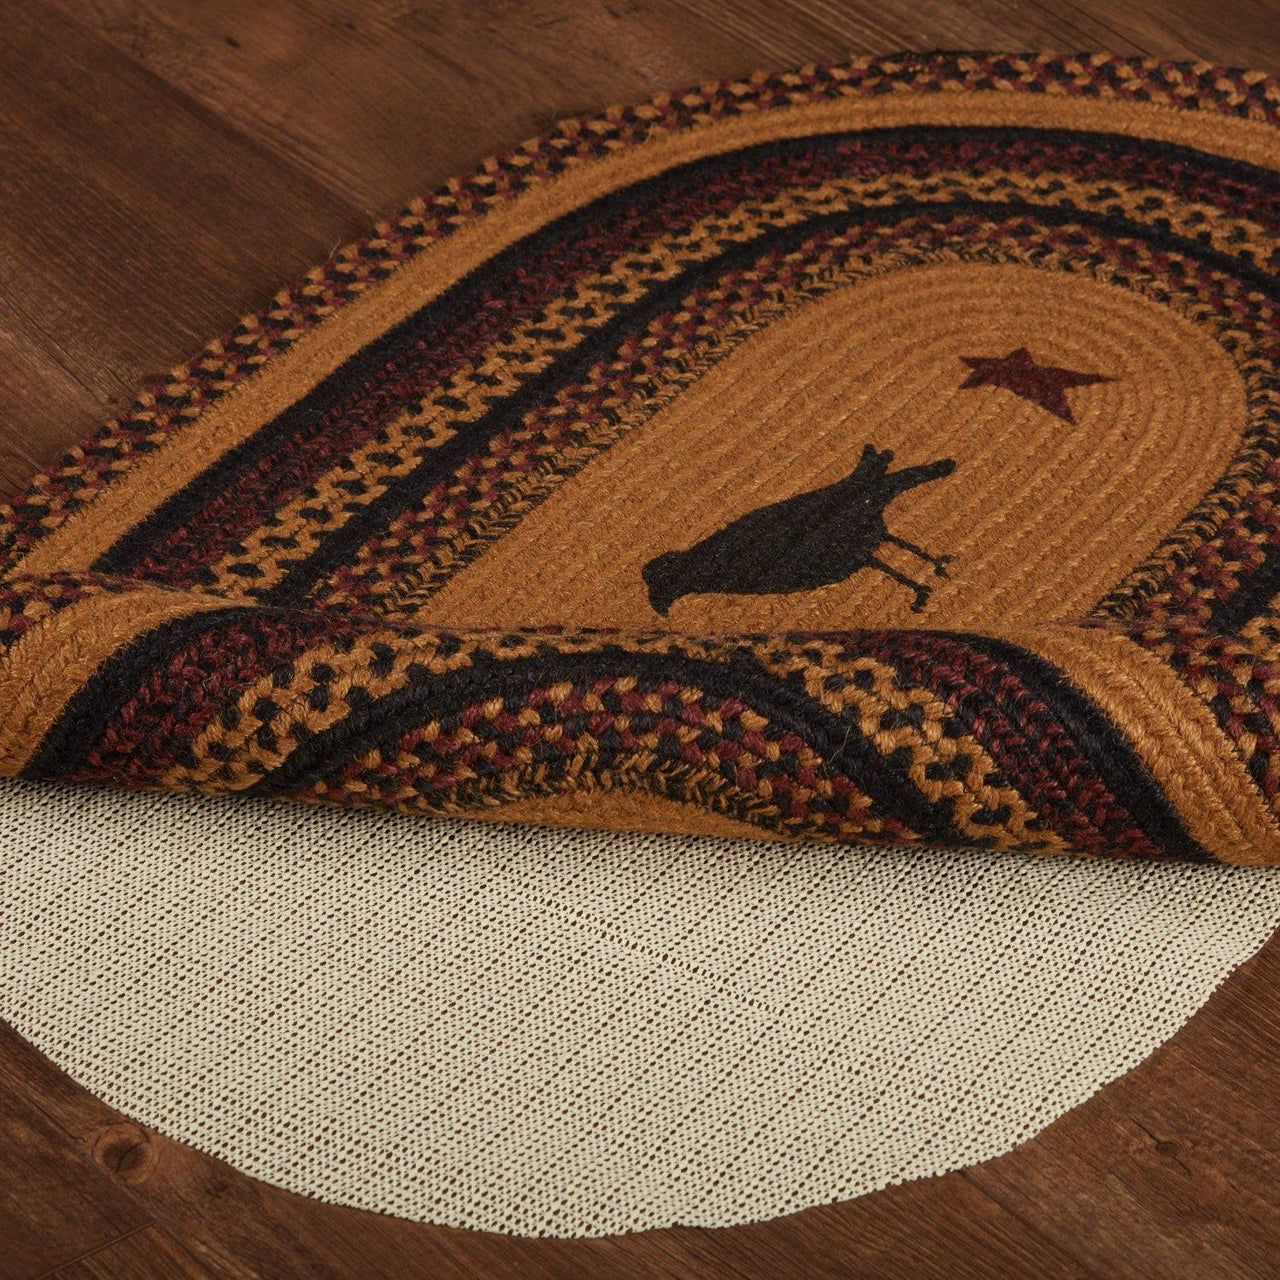 Heritage Farms Crow Jute Braided Rug Oval 20'x30' with Rug Pad VHC Brands - The Fox Decor